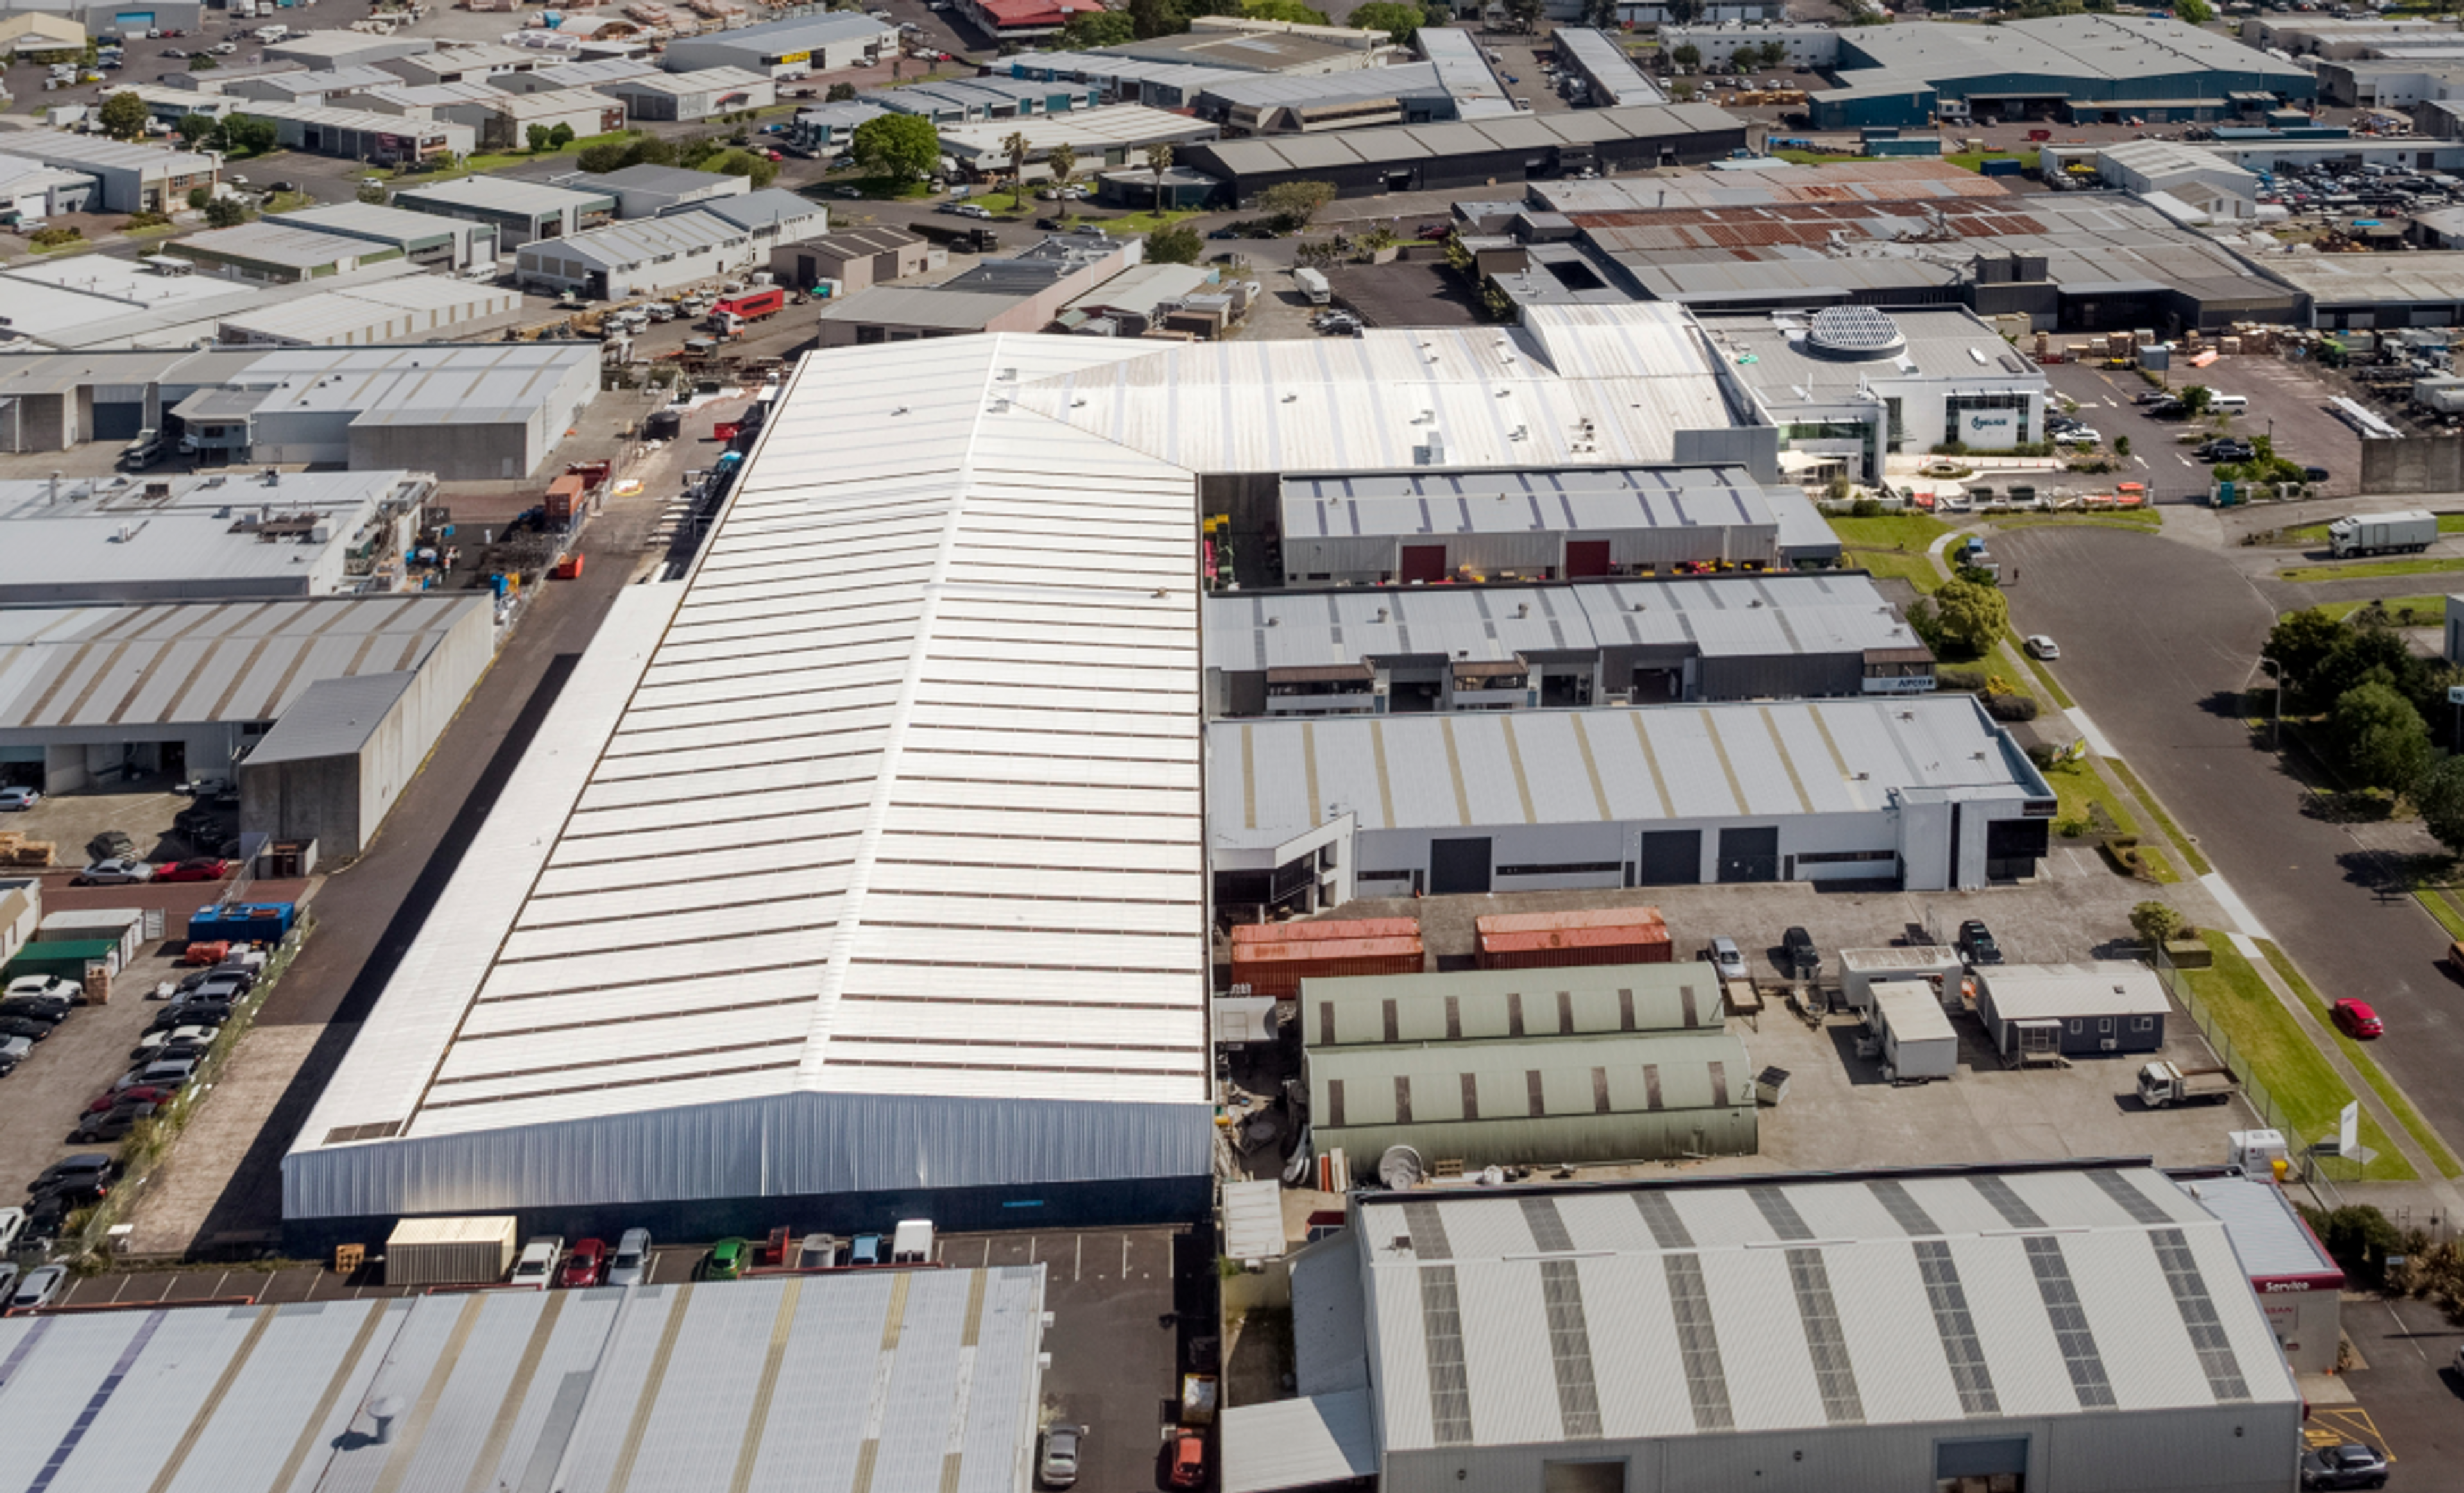 East Tamaki remains one of Auckland’s largest and most popular industrial precincts, located less than 20kms to the CBD and 18kms to Auckland airport. 